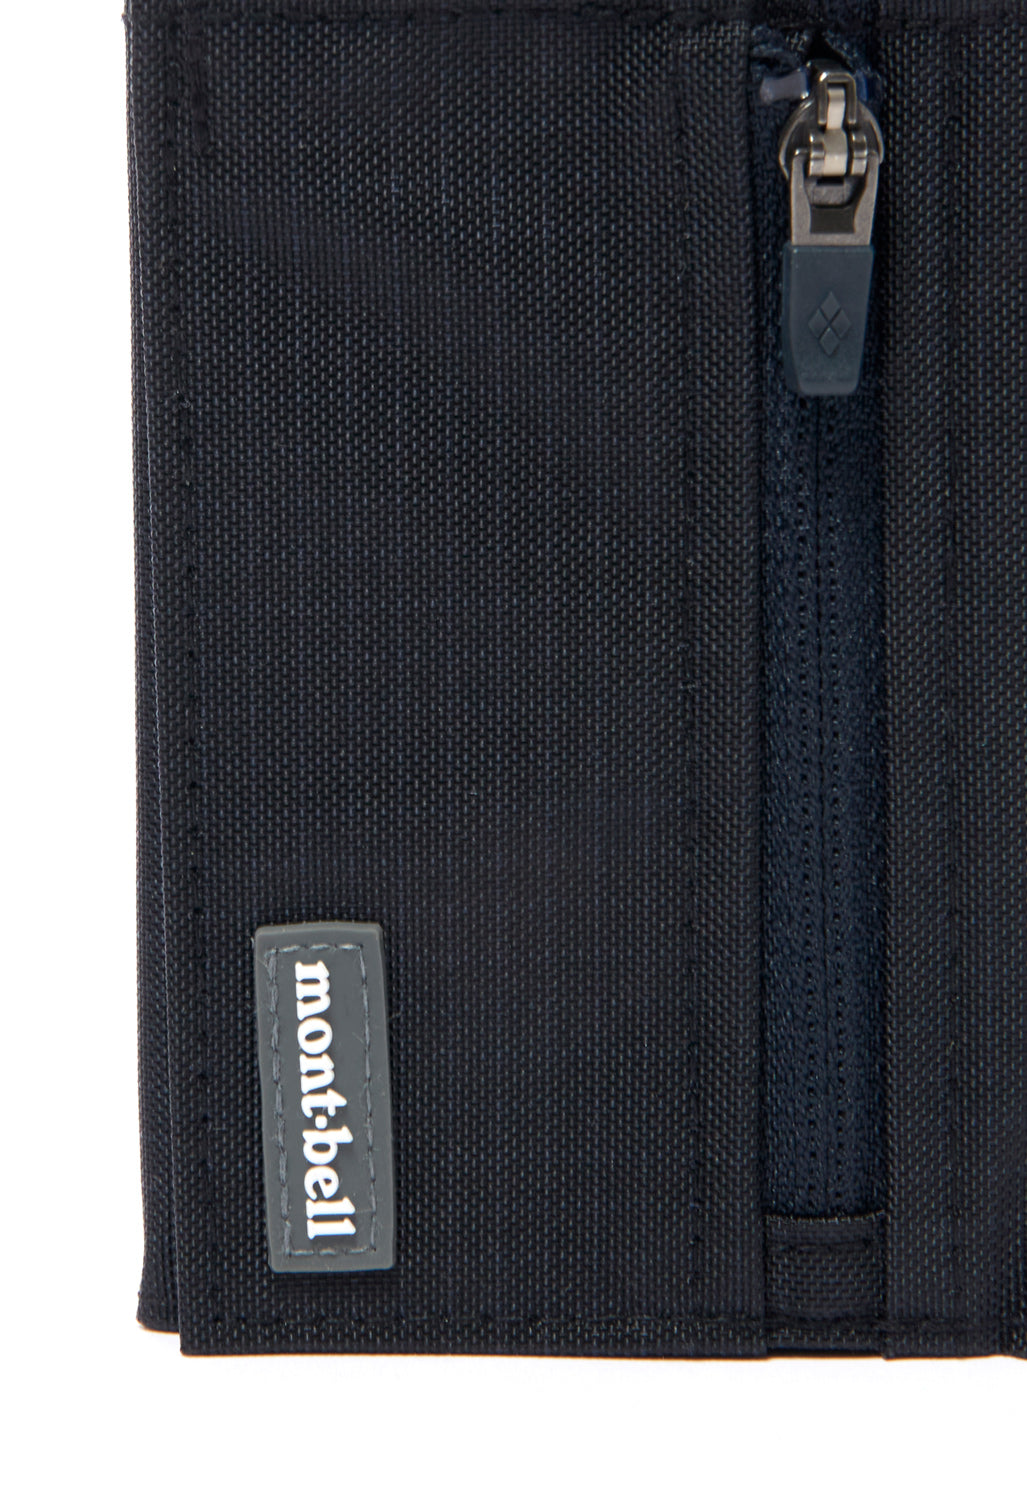 Montbell Trail Wallet - Black